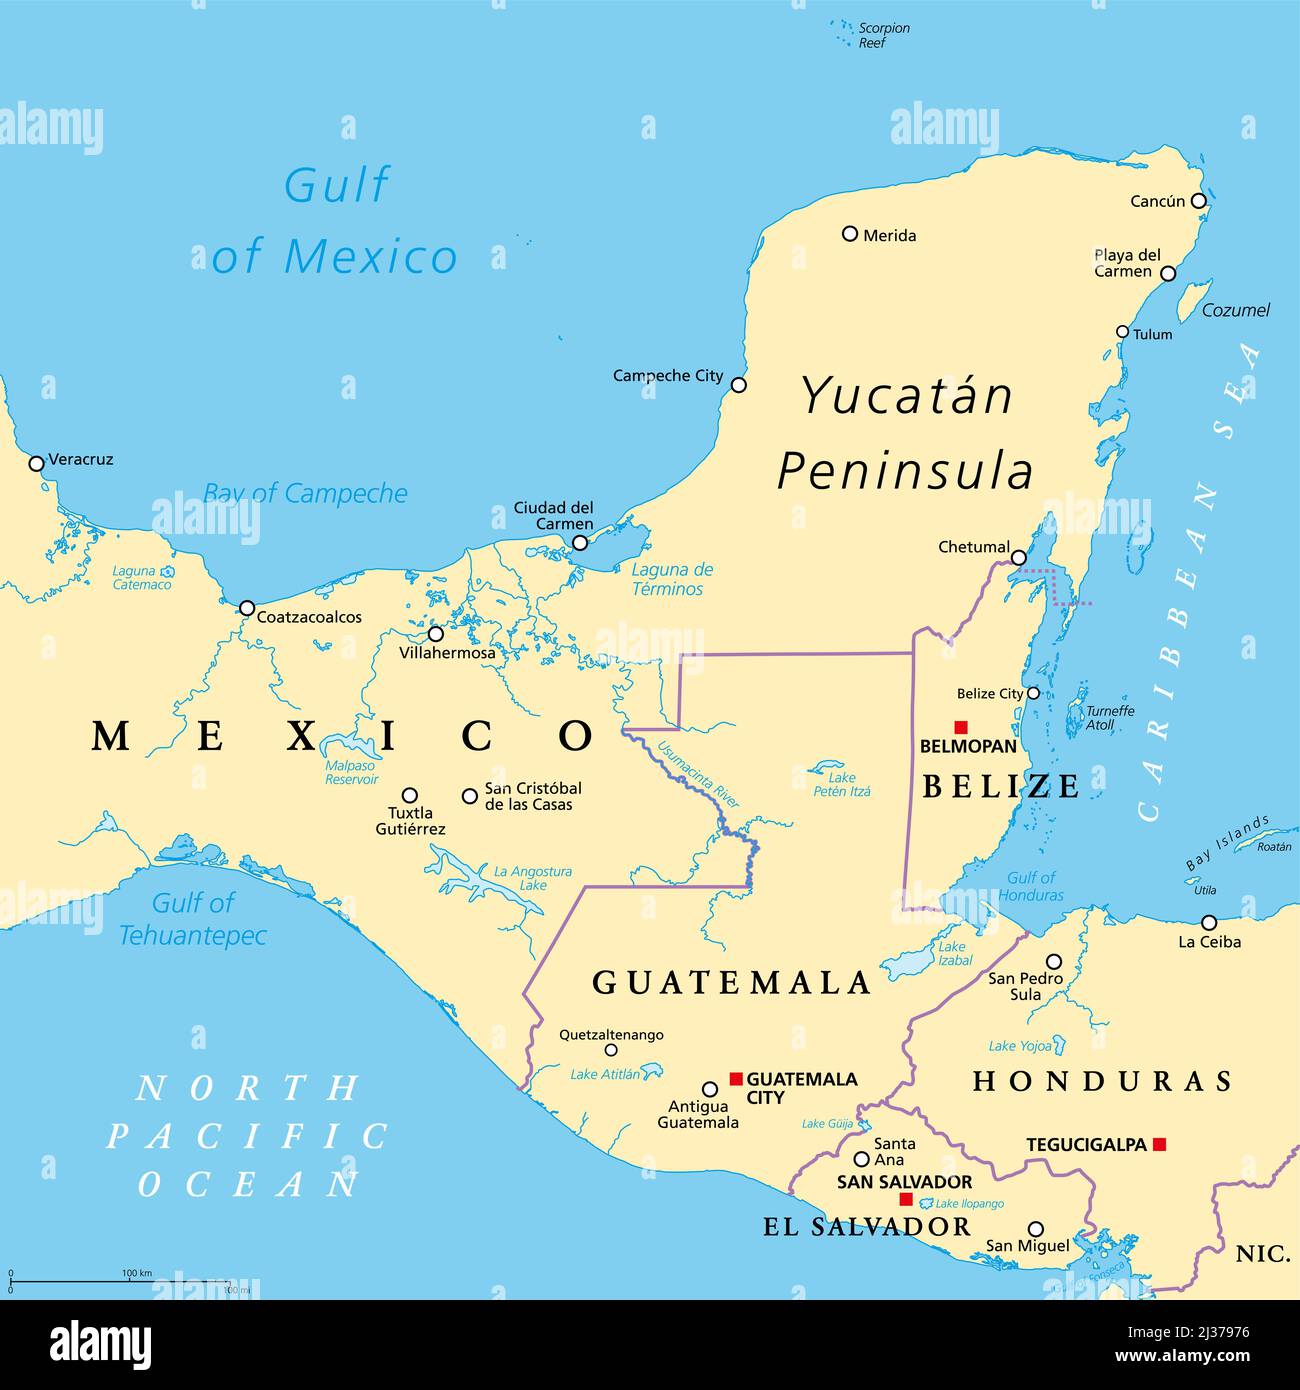 Yucatan Peninsula political map. Large peninsula in southeastern Mexico and adjectants portions of Belize and Guatemala. Stock Photo